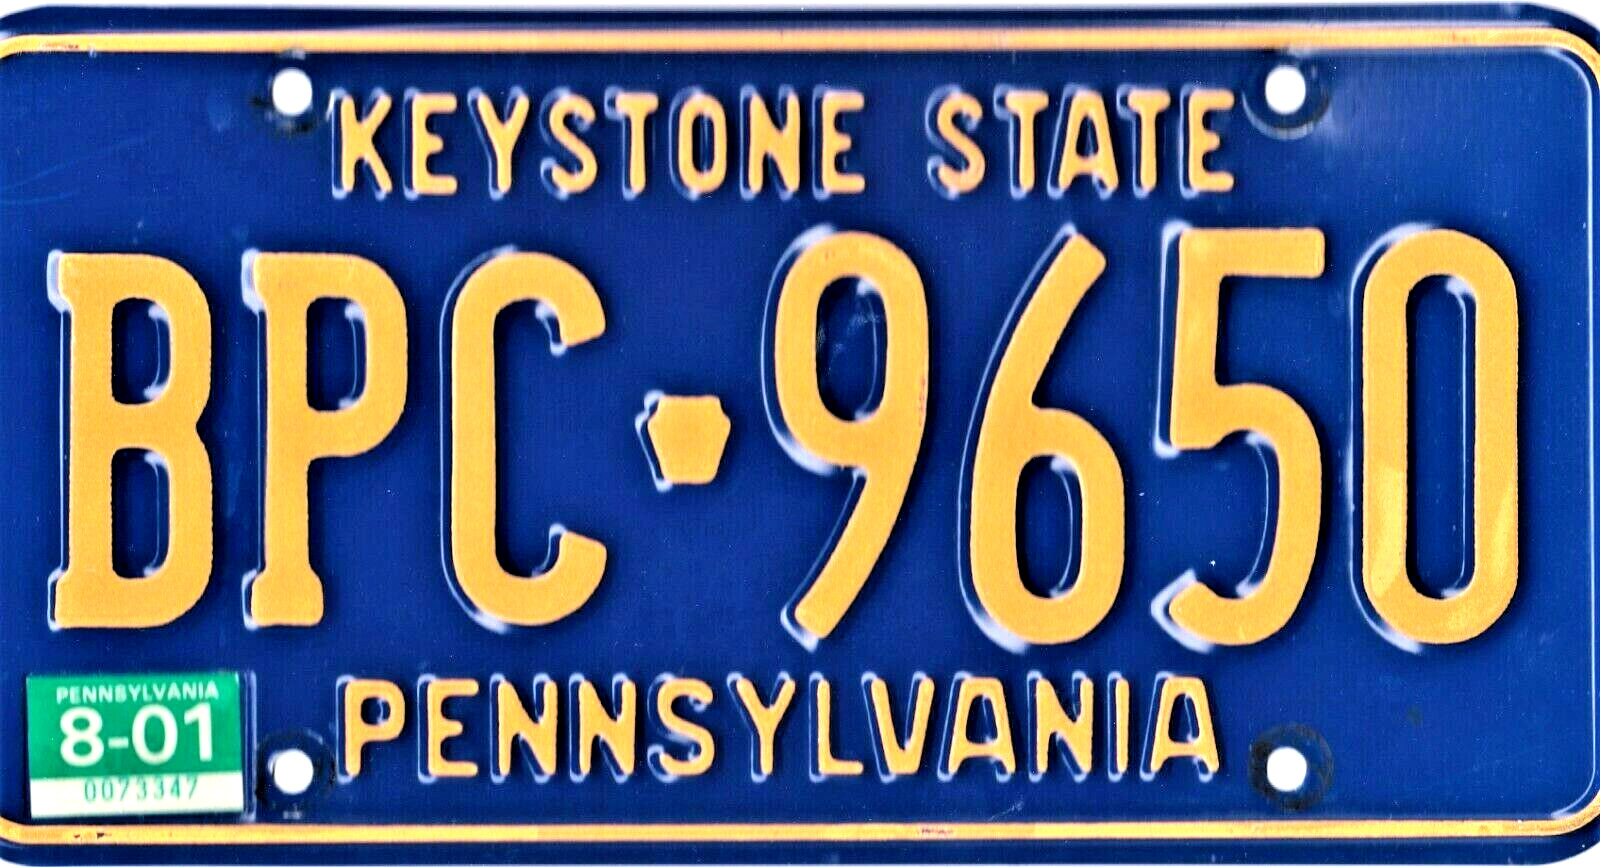 2001 PENNSYLVANIA LICENSE PLATE - YELLOW LETTERING ON BLUE with AUG 2001 STICKER